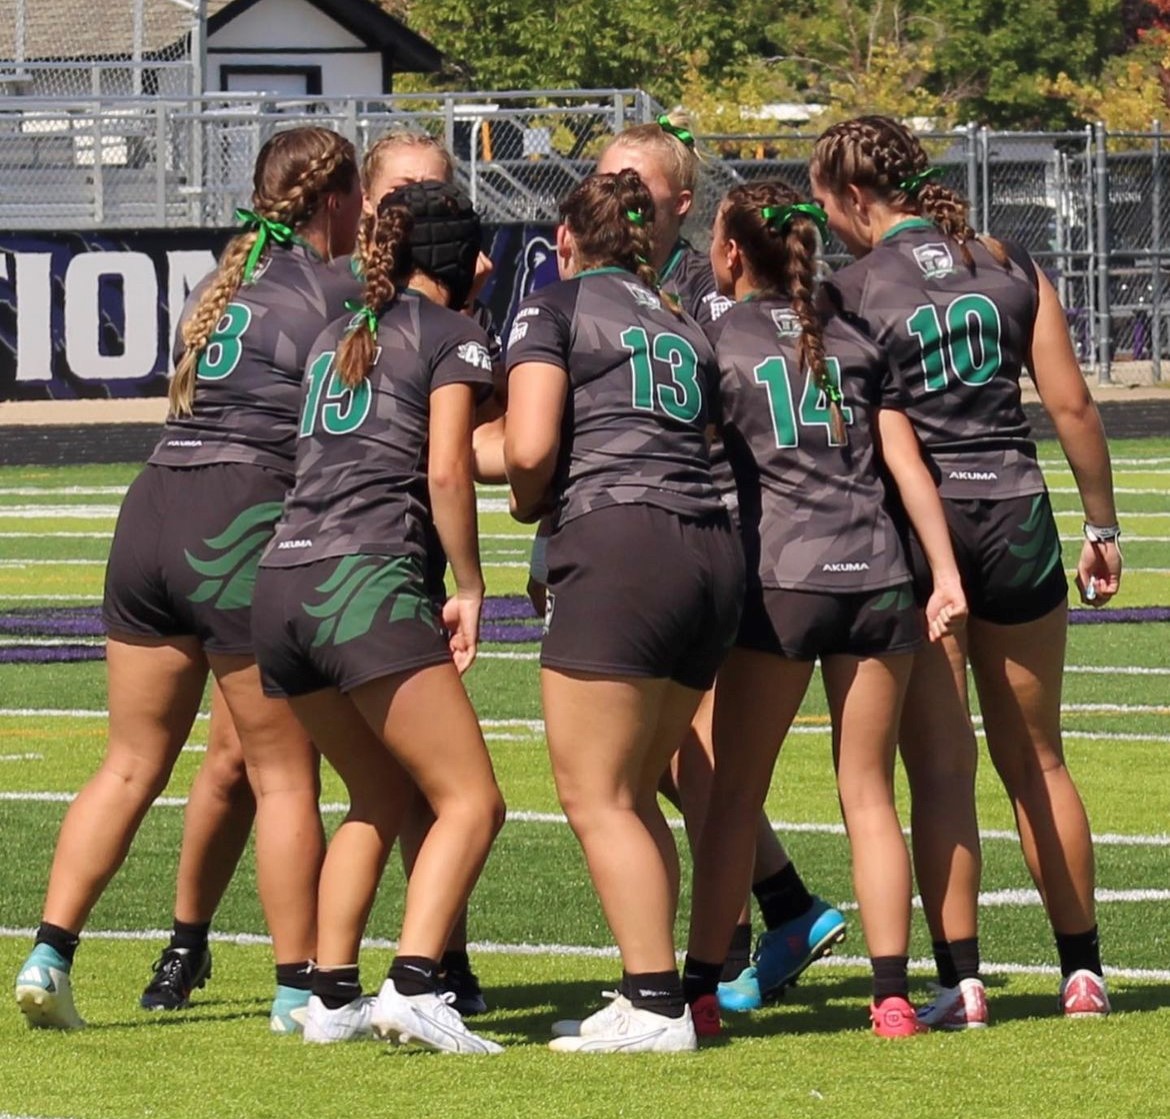 Eagle High Girls Rugby is Back in Action this Season